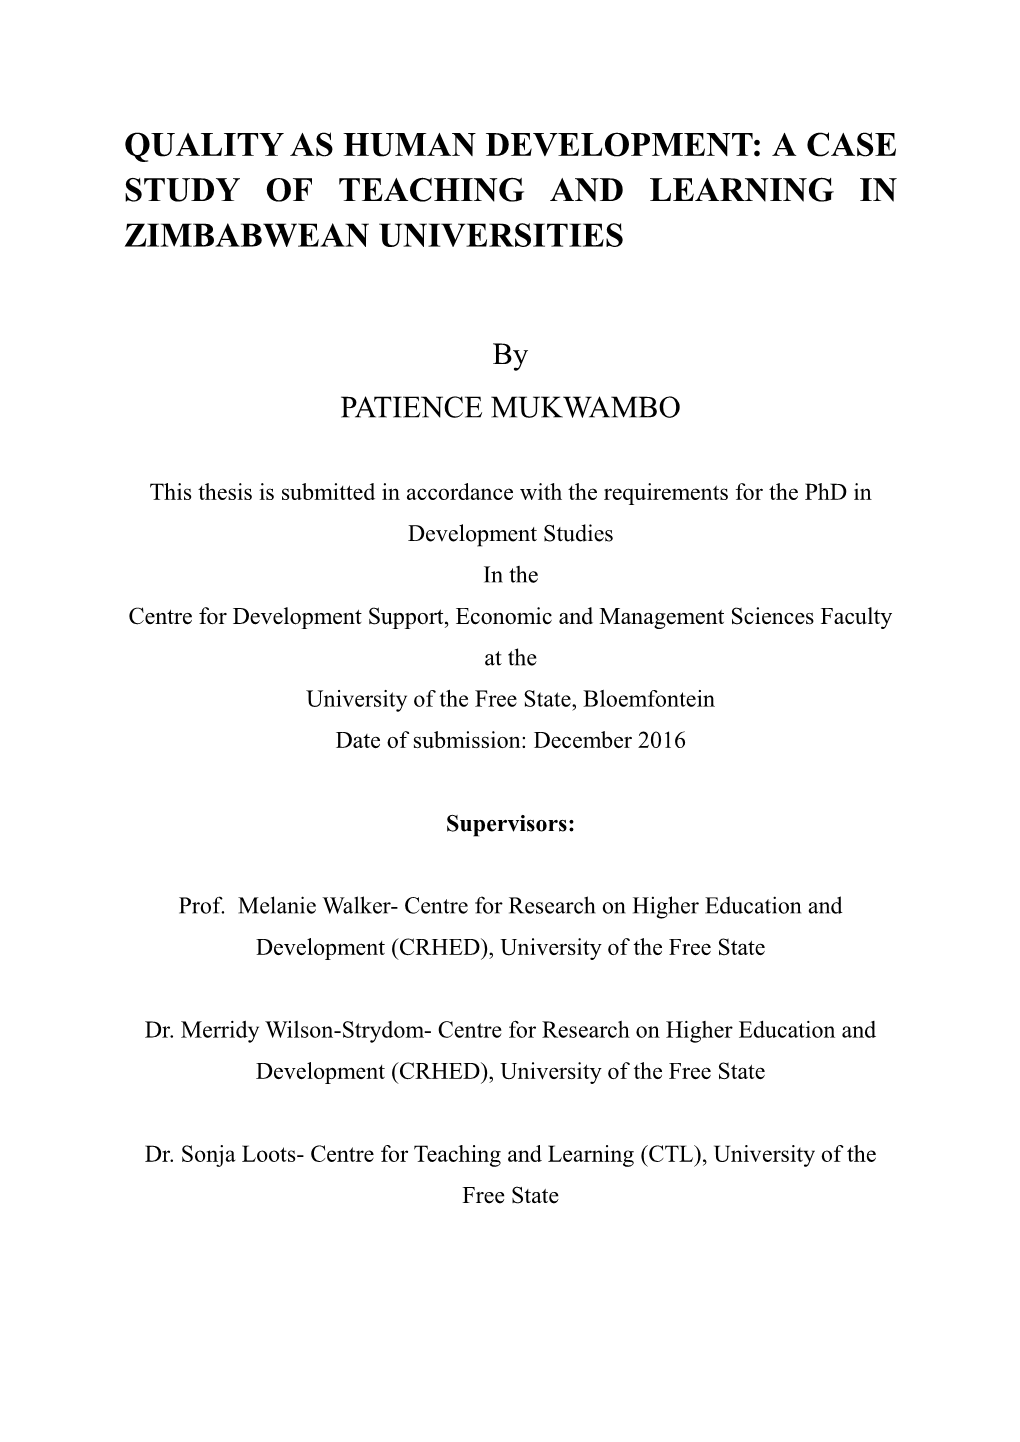 A Case Study of Teaching and Learning in Zimbabwean Universities